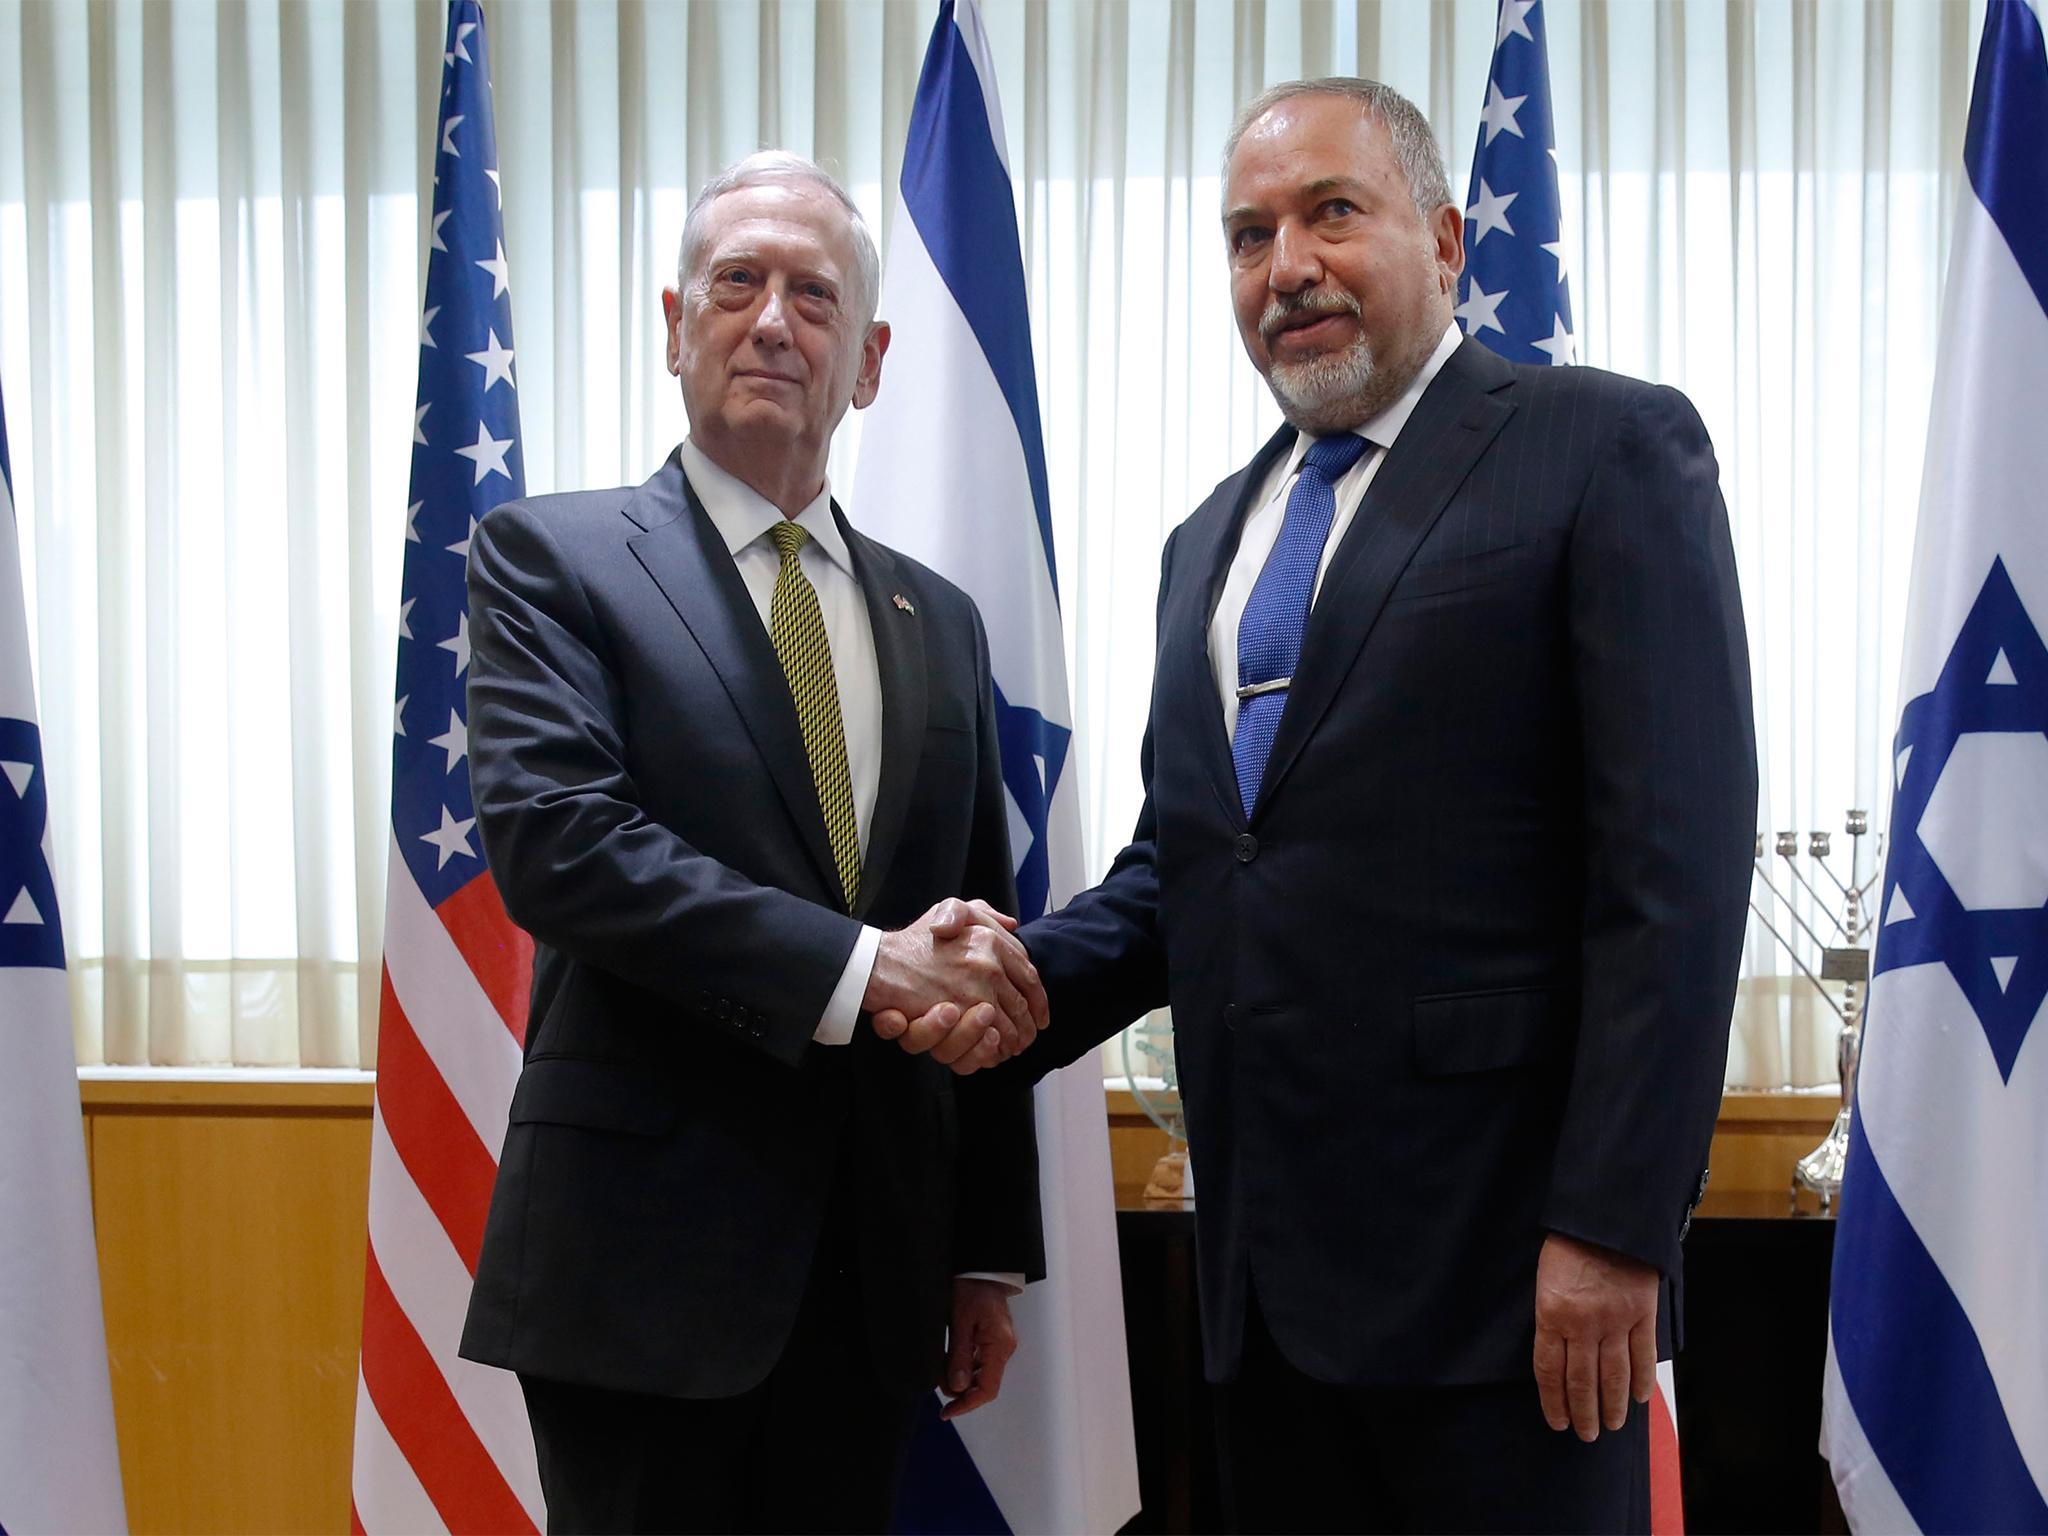 Israel's Defence Minister (above right) has called for peace